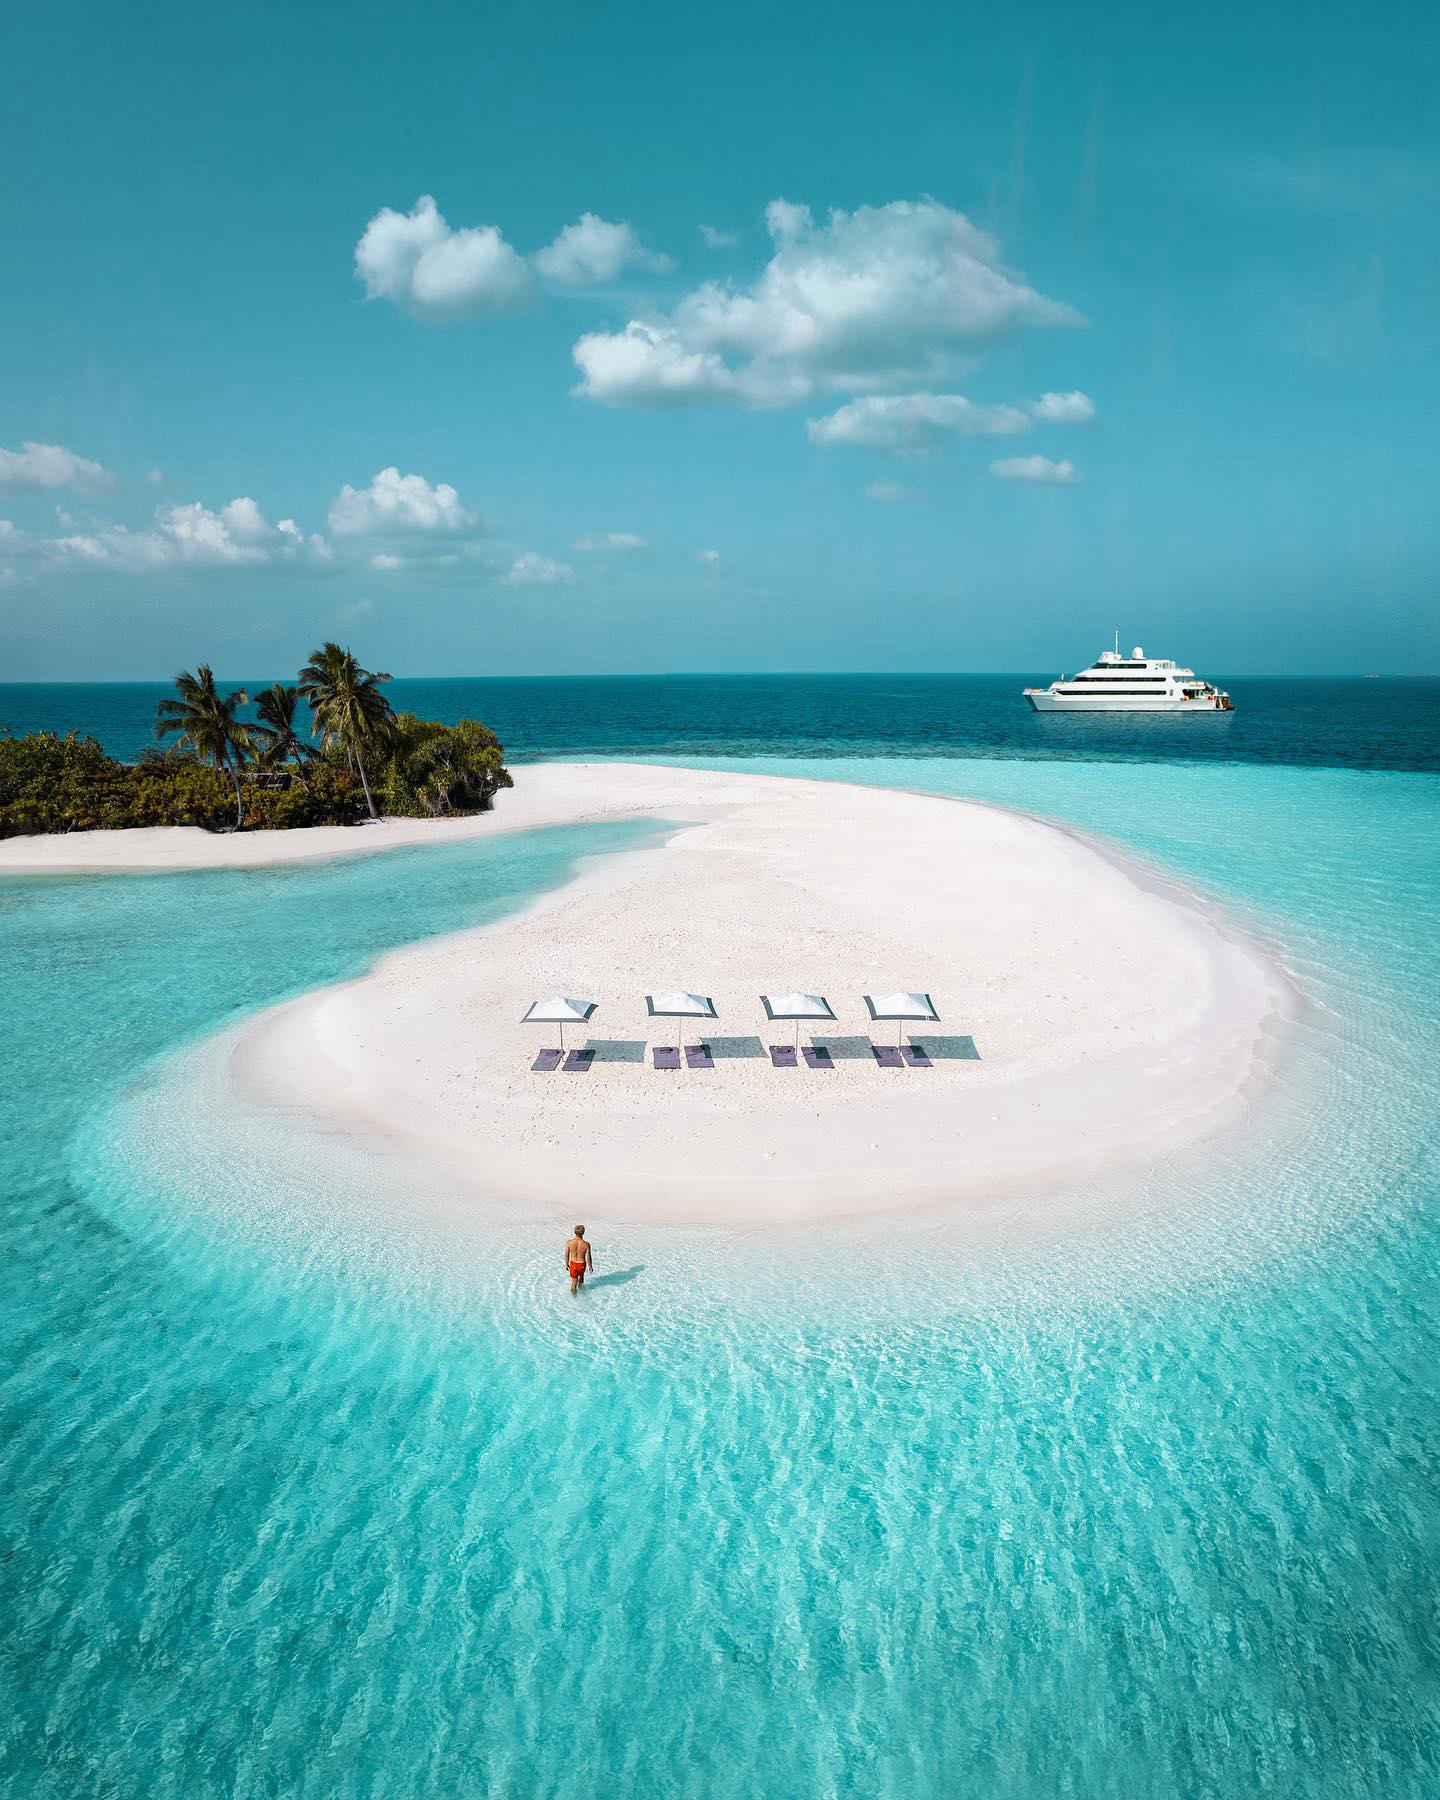 image  1 ➳ 	Λ L E X - Offering a unique opportunity to explore the stunning archipelago of the Maldives, the